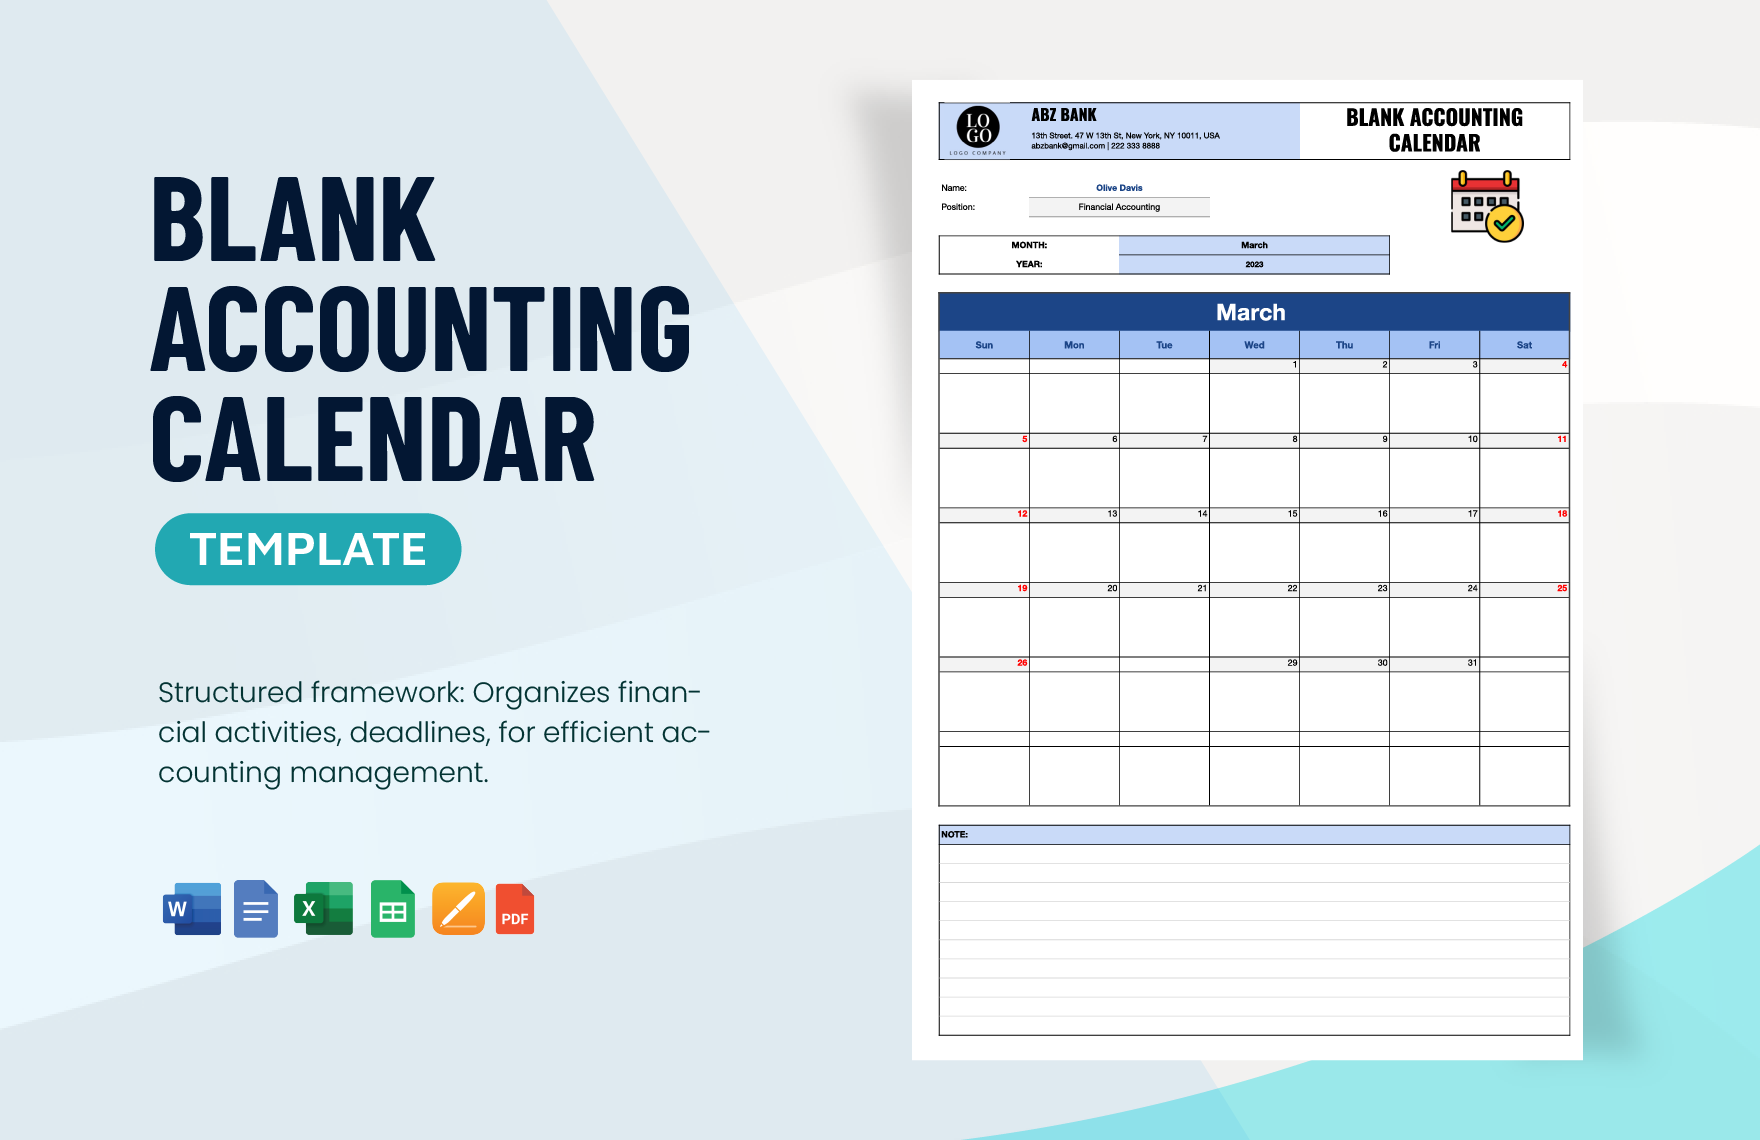 Blank Accounting Calendar Template in Word, Google Docs, Excel, PDF, Google Sheets, Apple Pages